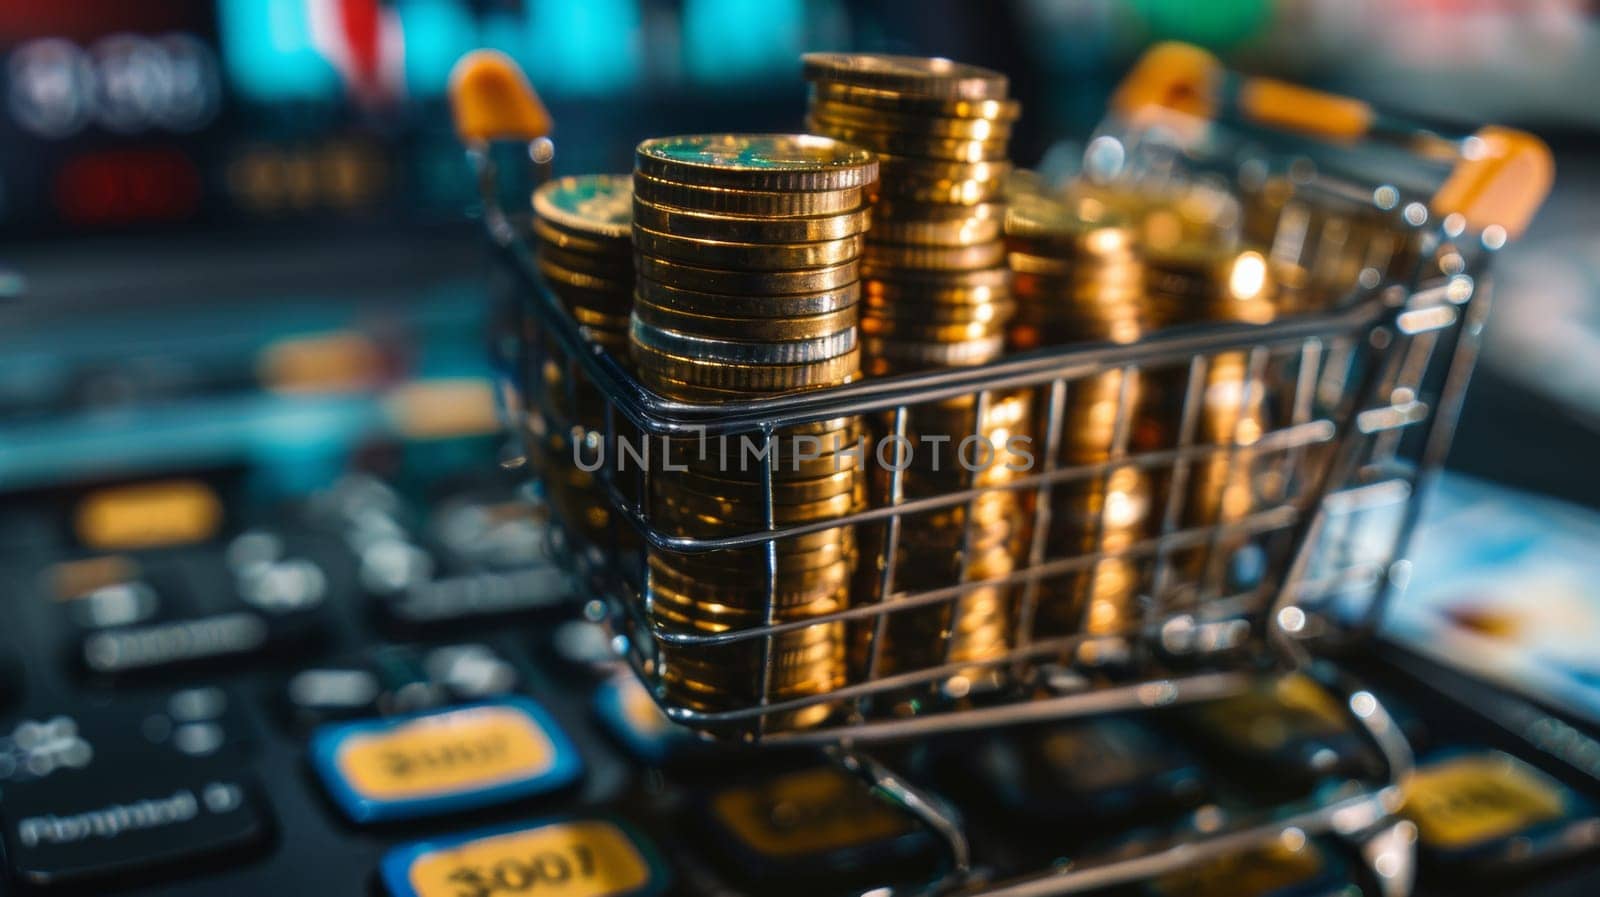 A small shopping cart filled with coins sitting on top of a keyboard